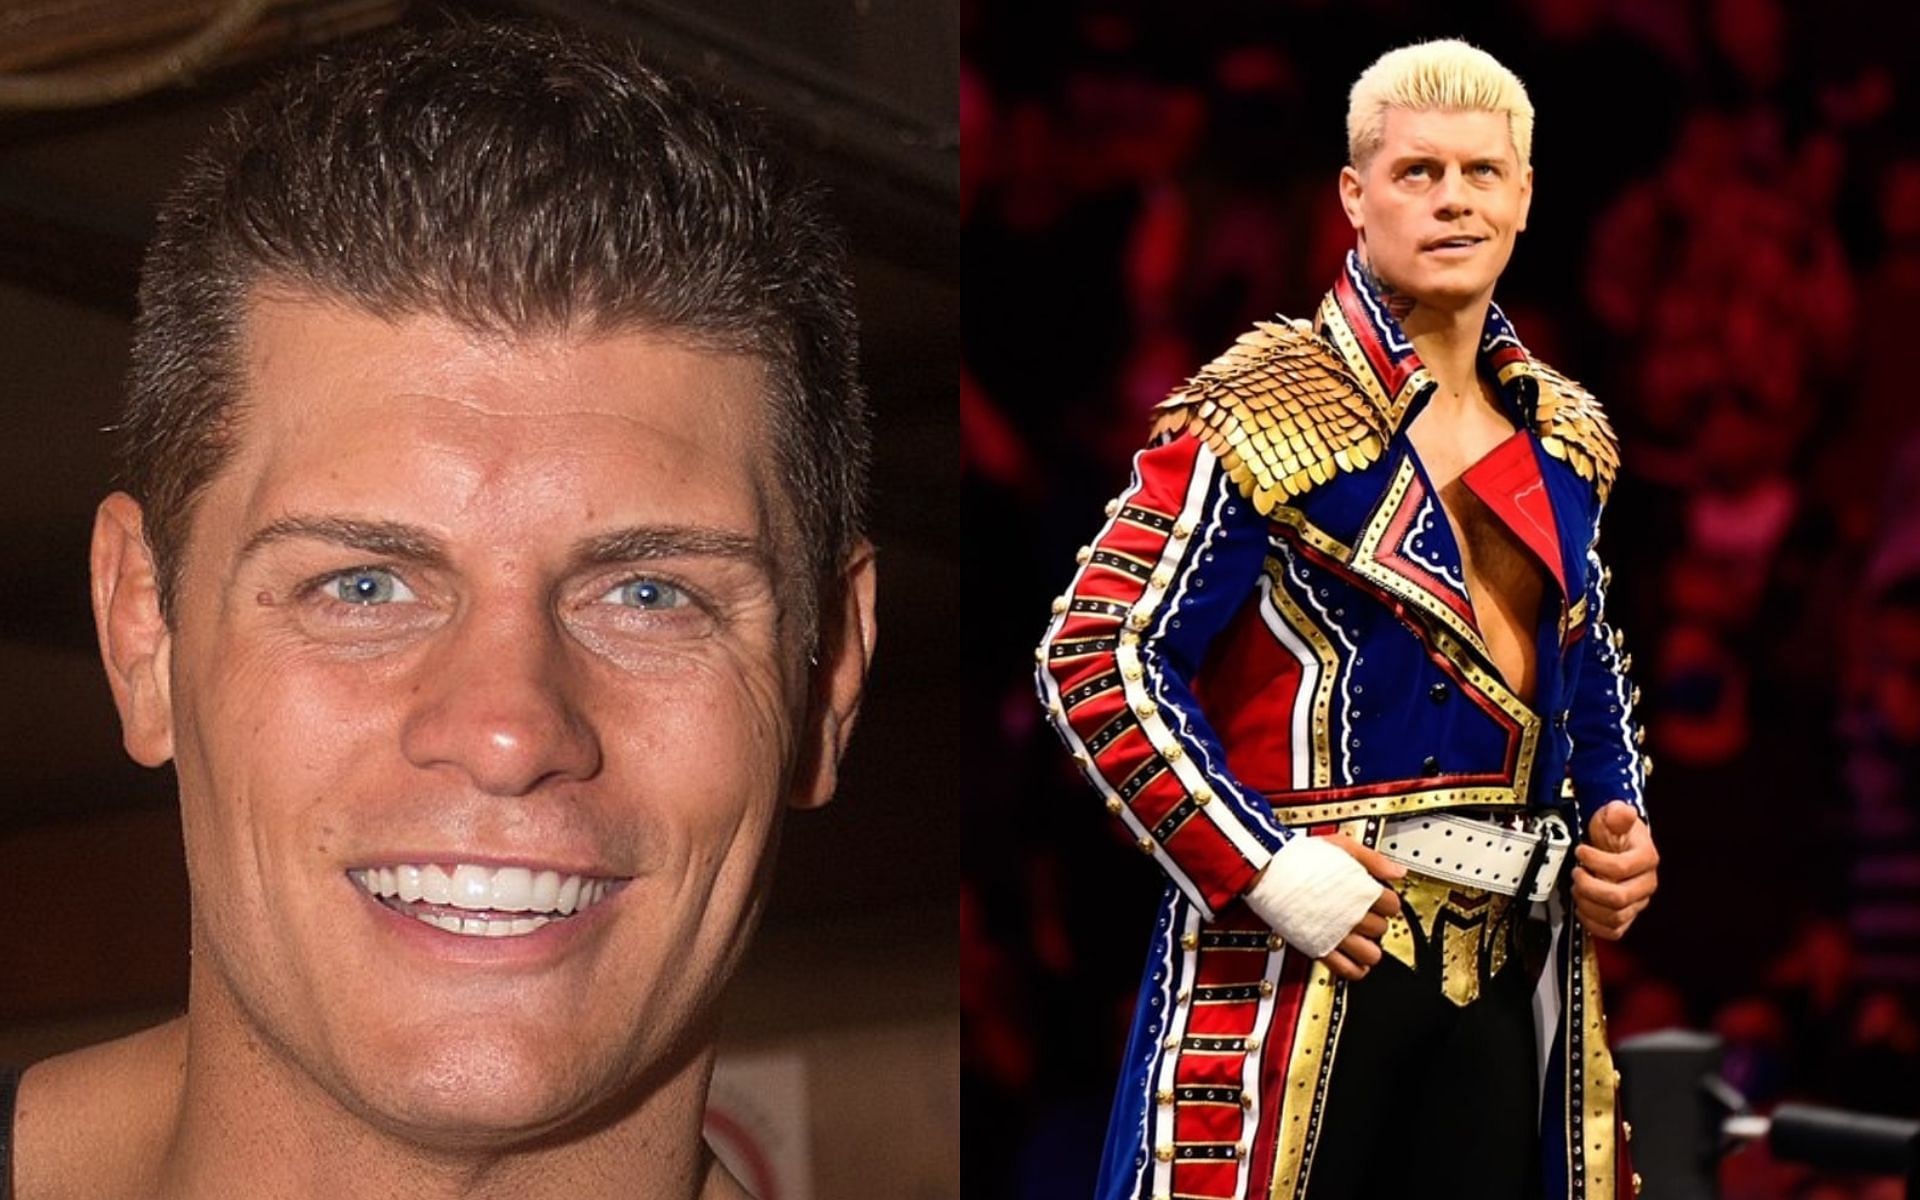 Cody Rhodes is a two-time Intercontinental Champion